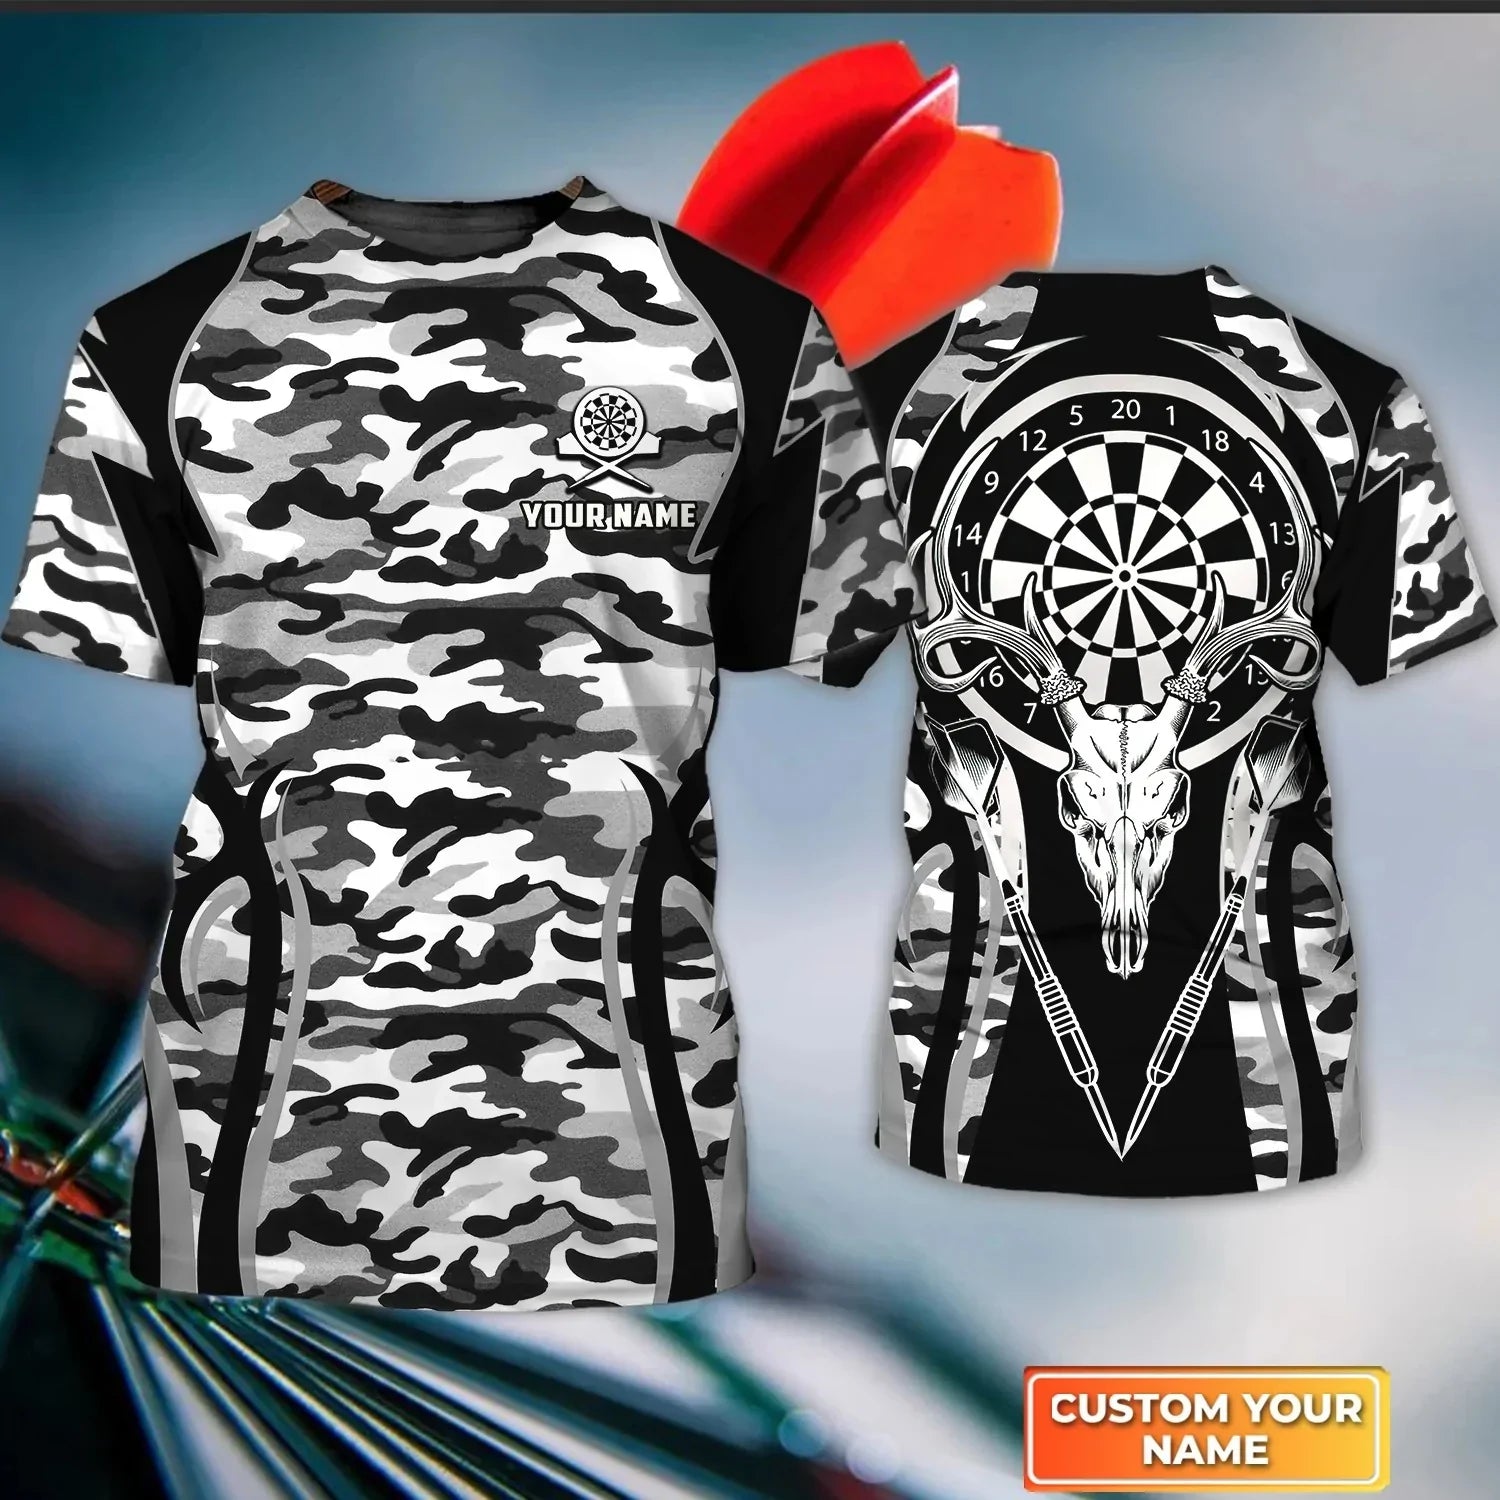 Darts 3D all over printed shirt for Men, Personalized Name 3D Tshirt, gift for darts lovers – DT002